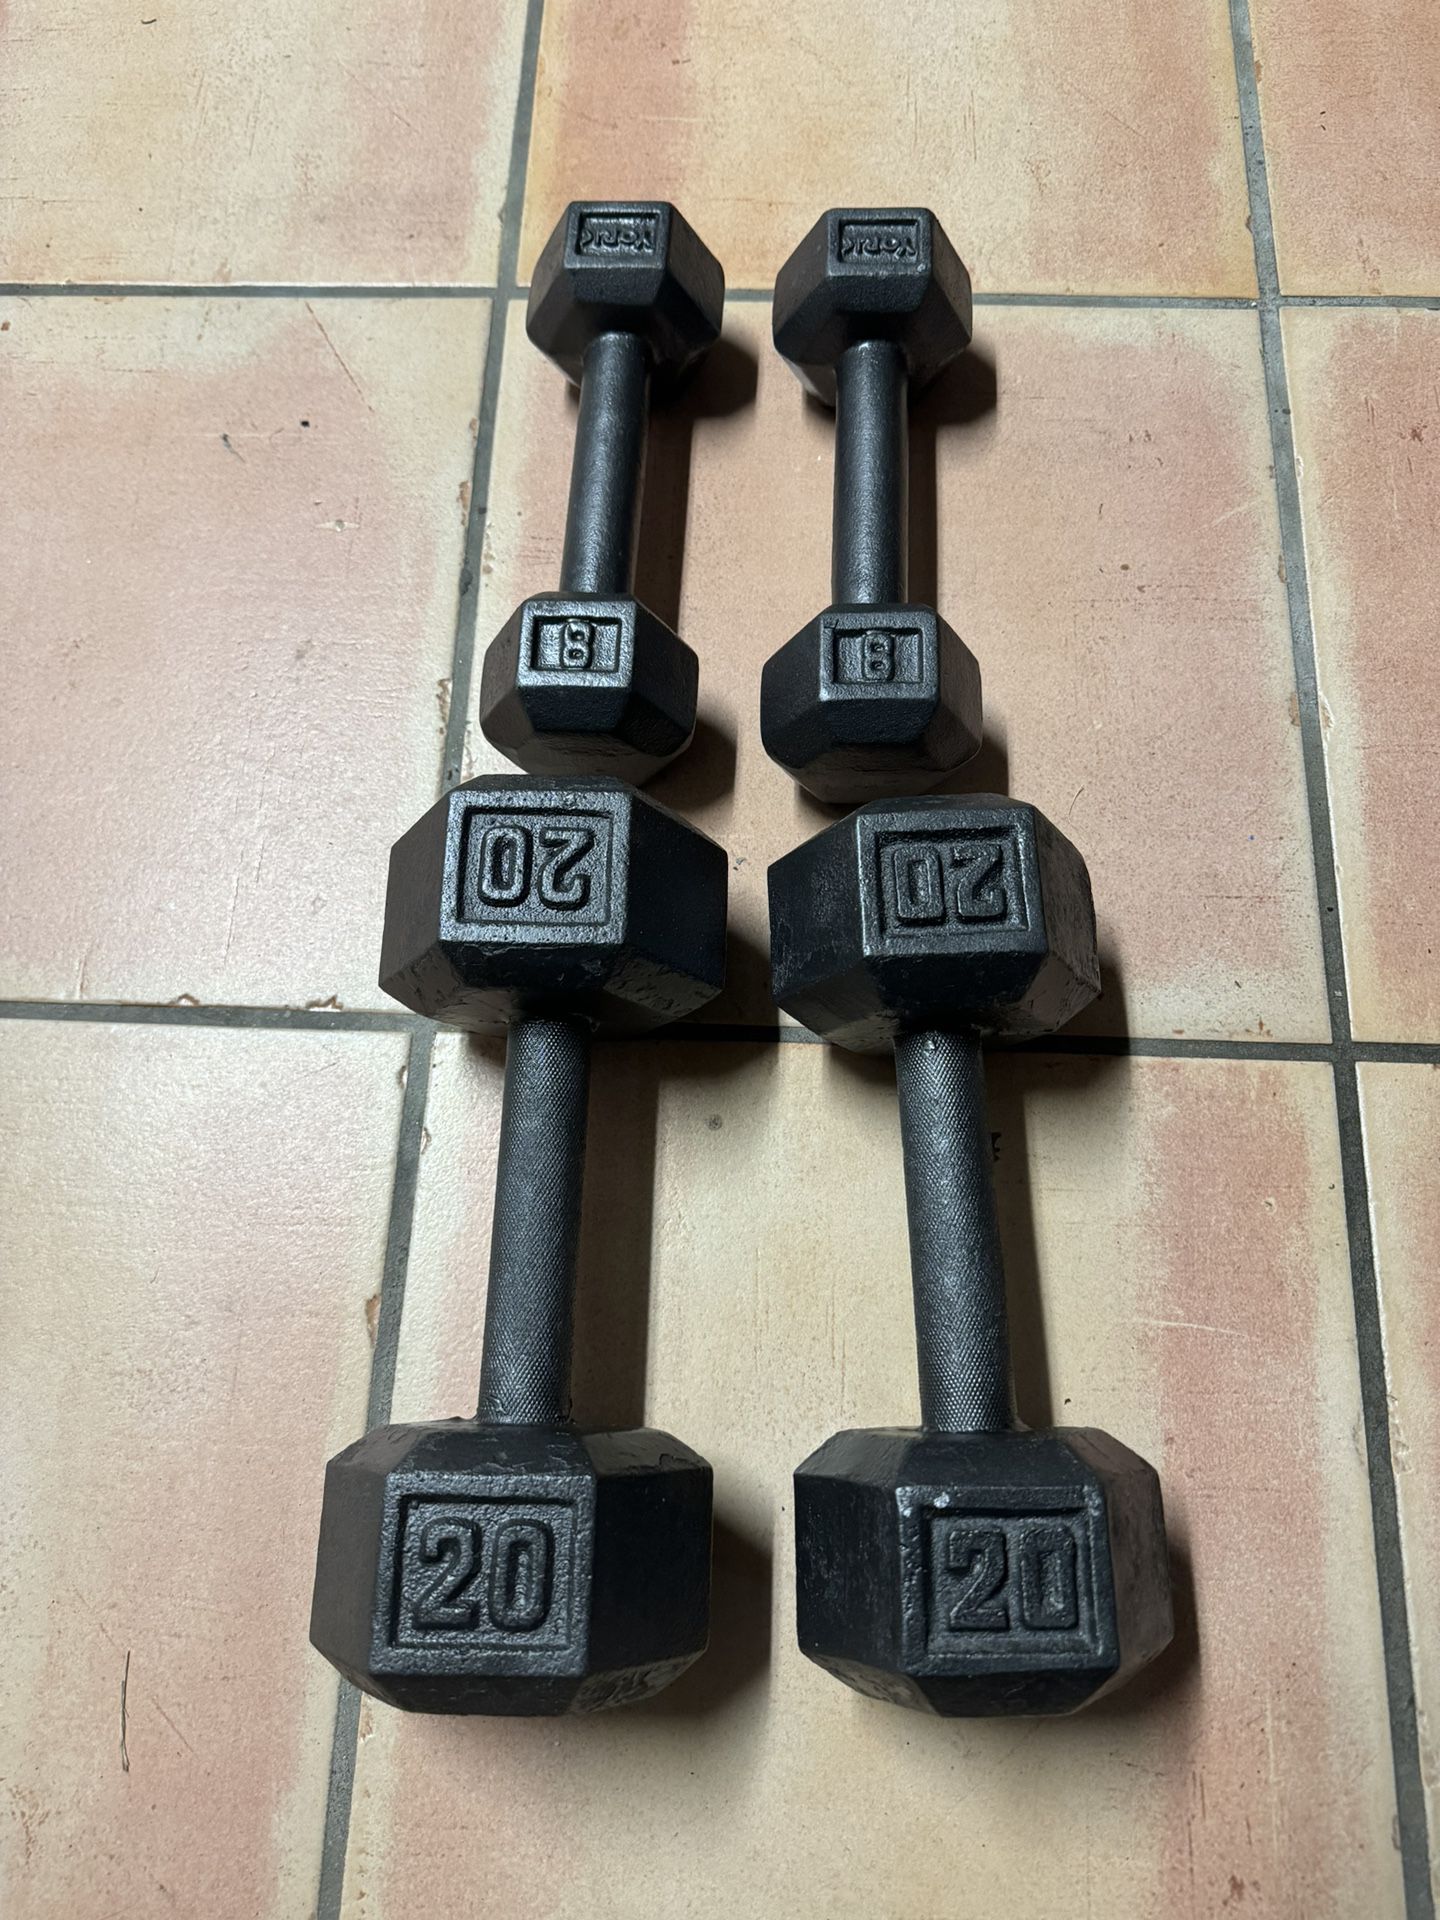 Two Sets of Dumbbells.  20lbs and 8lbs